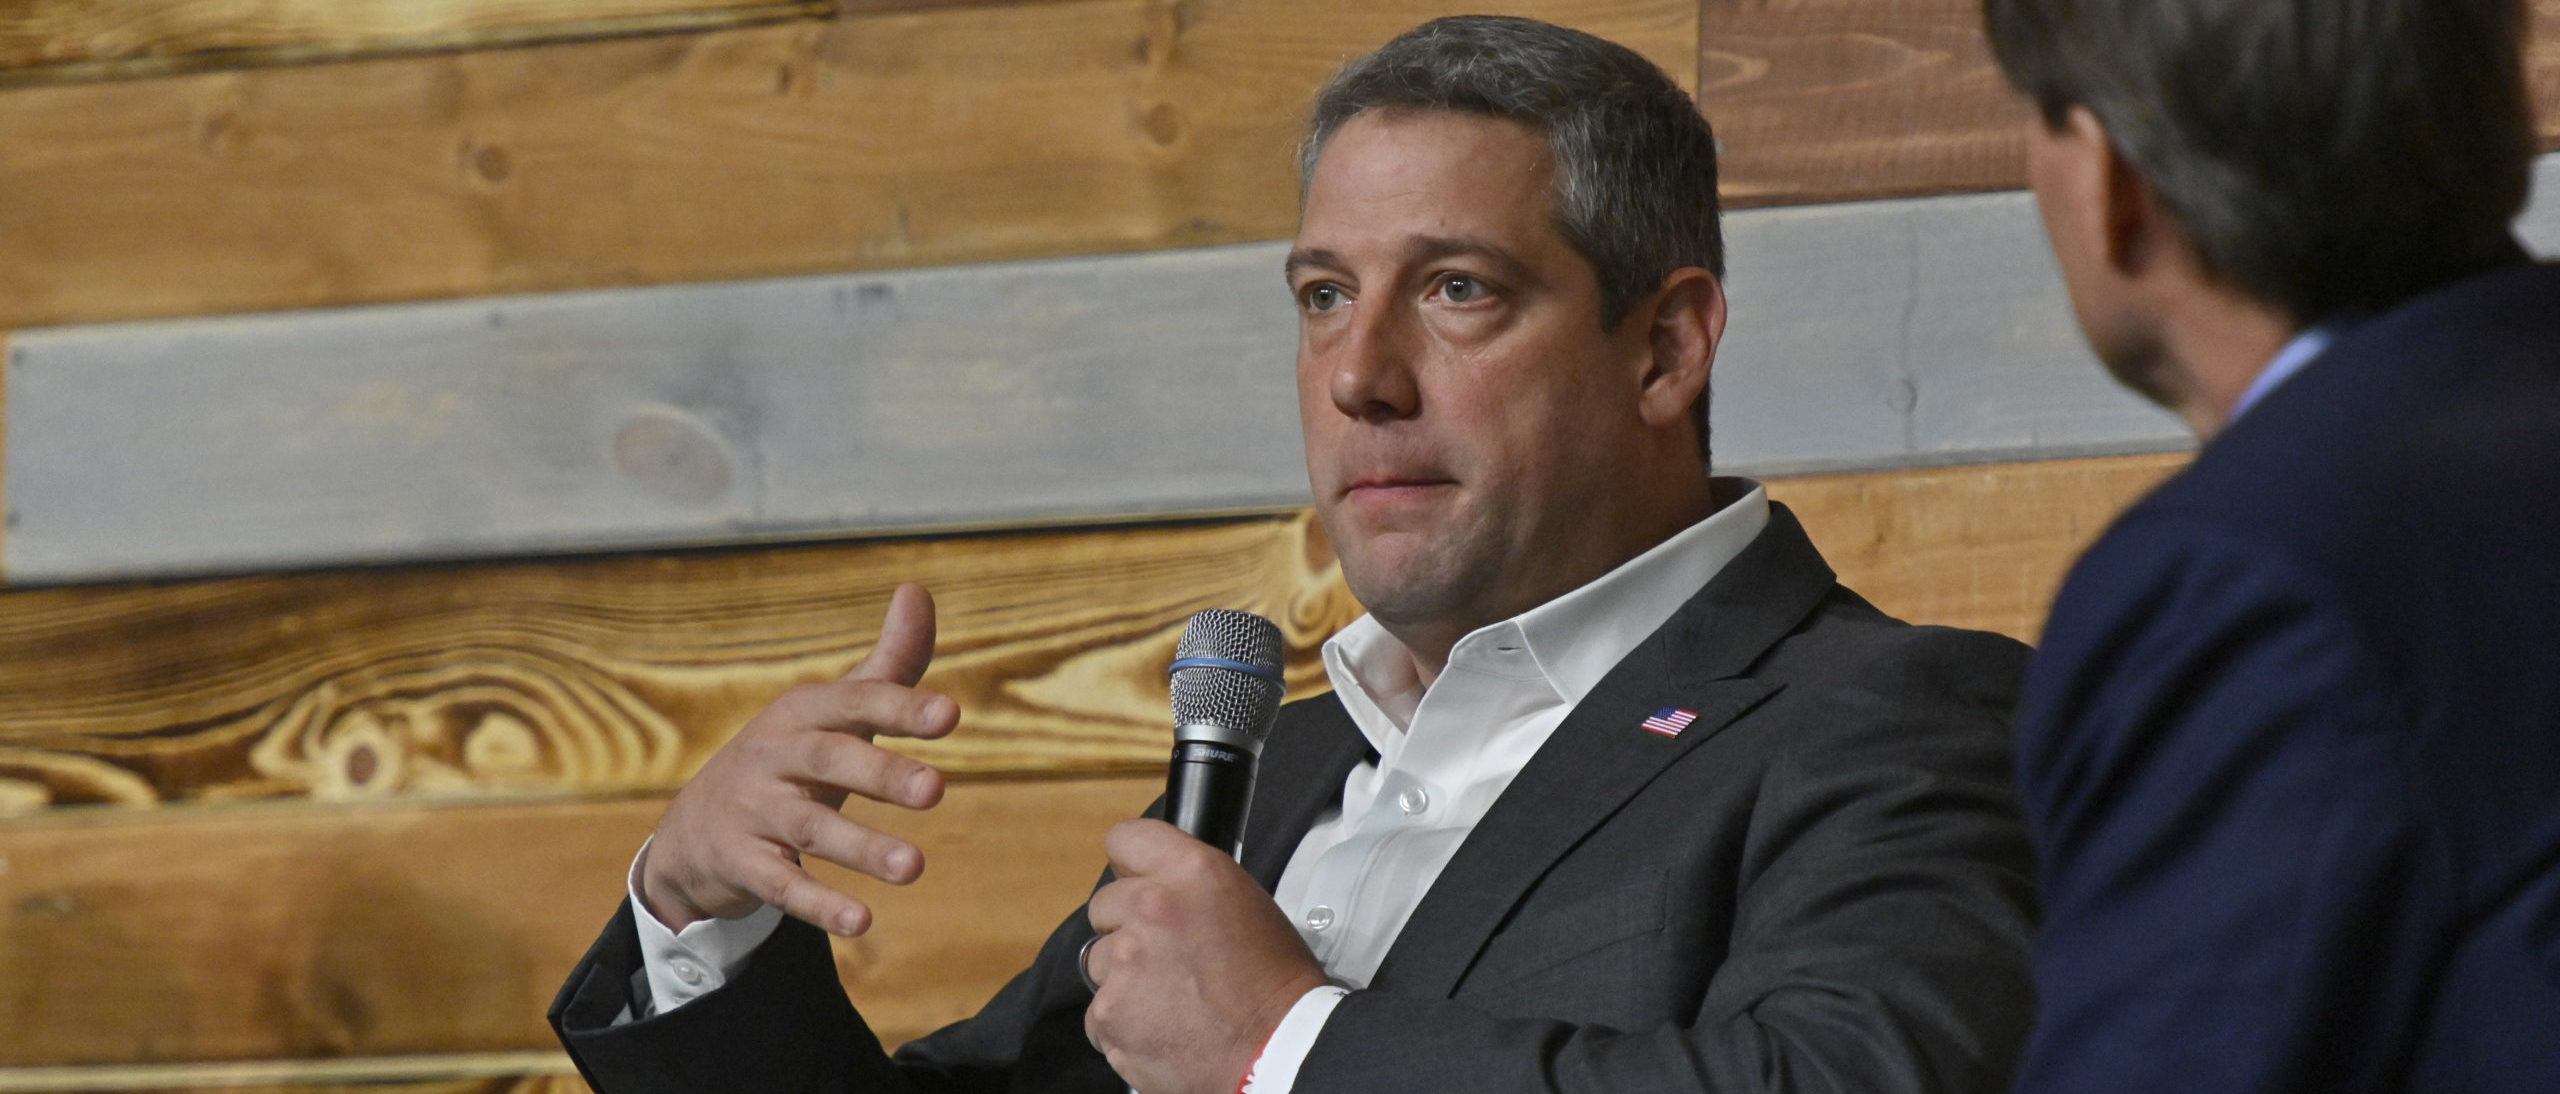 Senate Candidate Tim Ryan Uses COVID Voting Procedure 24 Times In One Day To Attend Campaign Events thumbnail